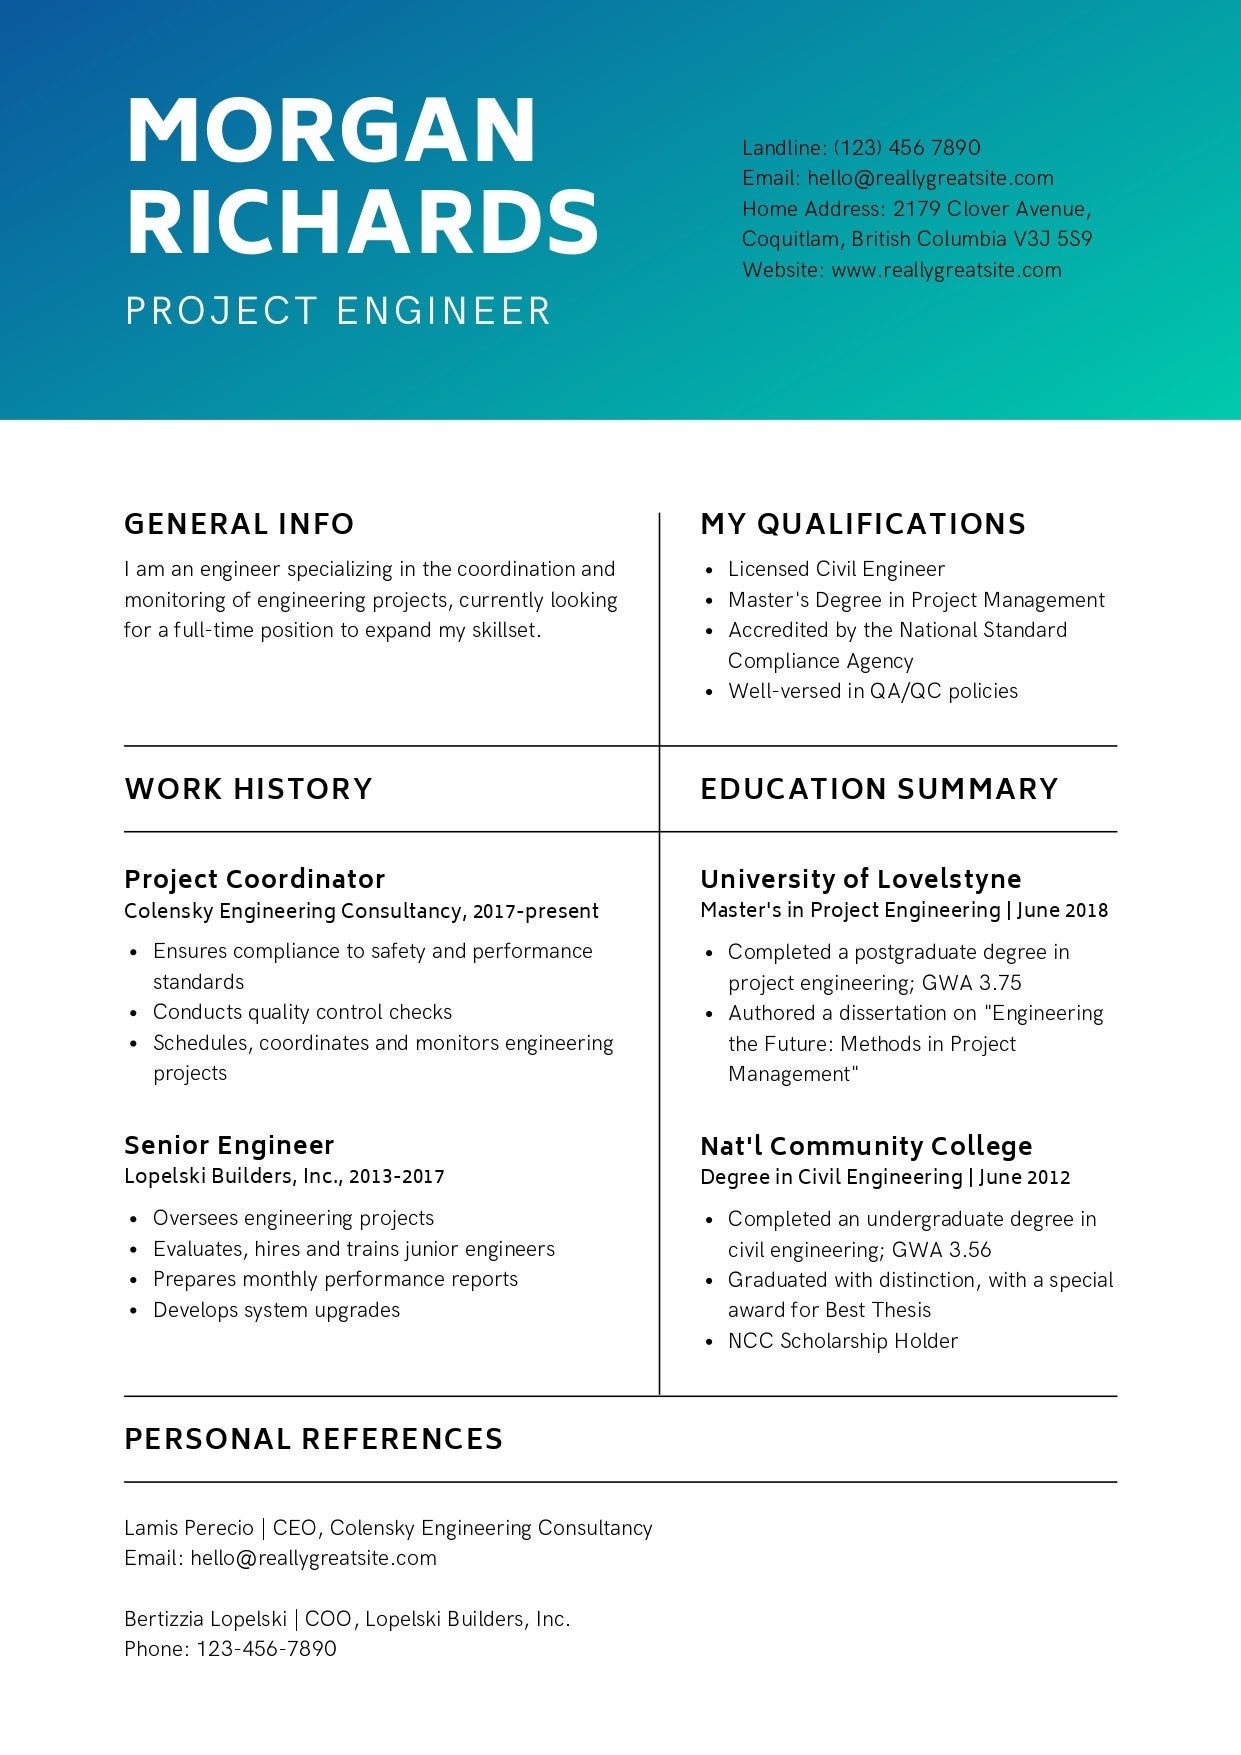 canva-resume-template-clean-resume-template-and-cv-design-etsy